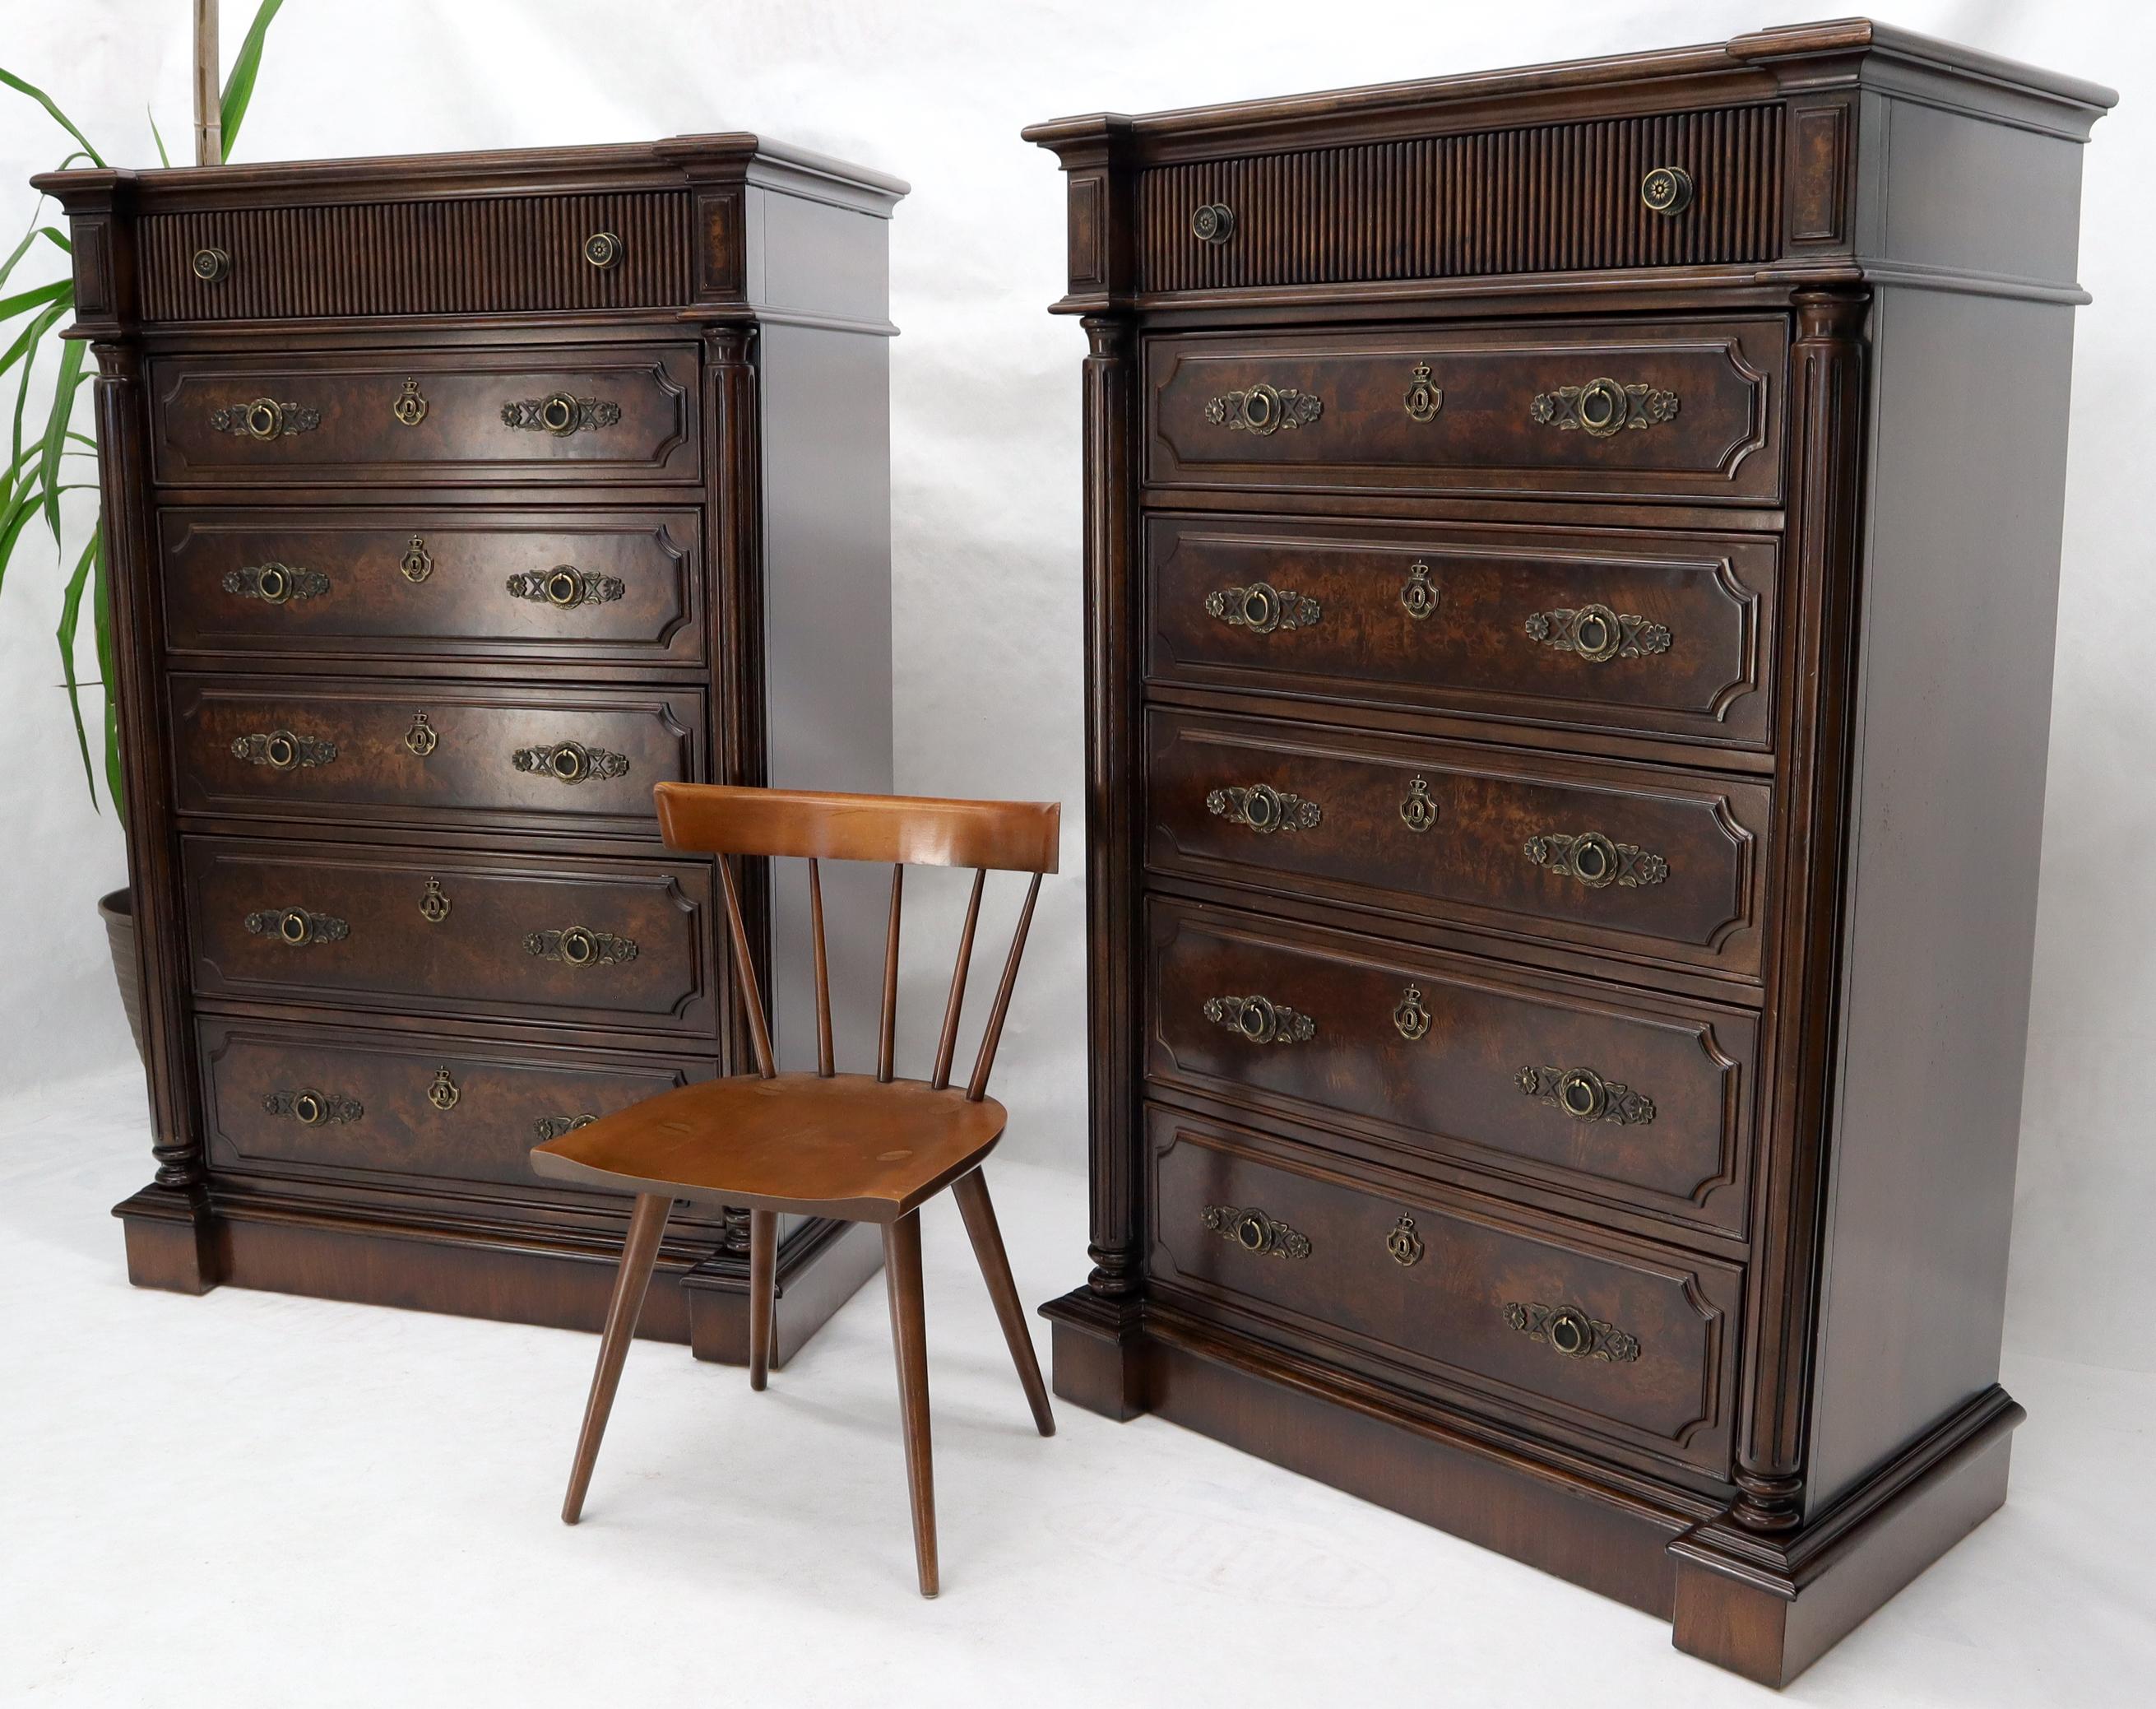 Pair of tall burl wood superior quality six drawers dresser in excellent condition.